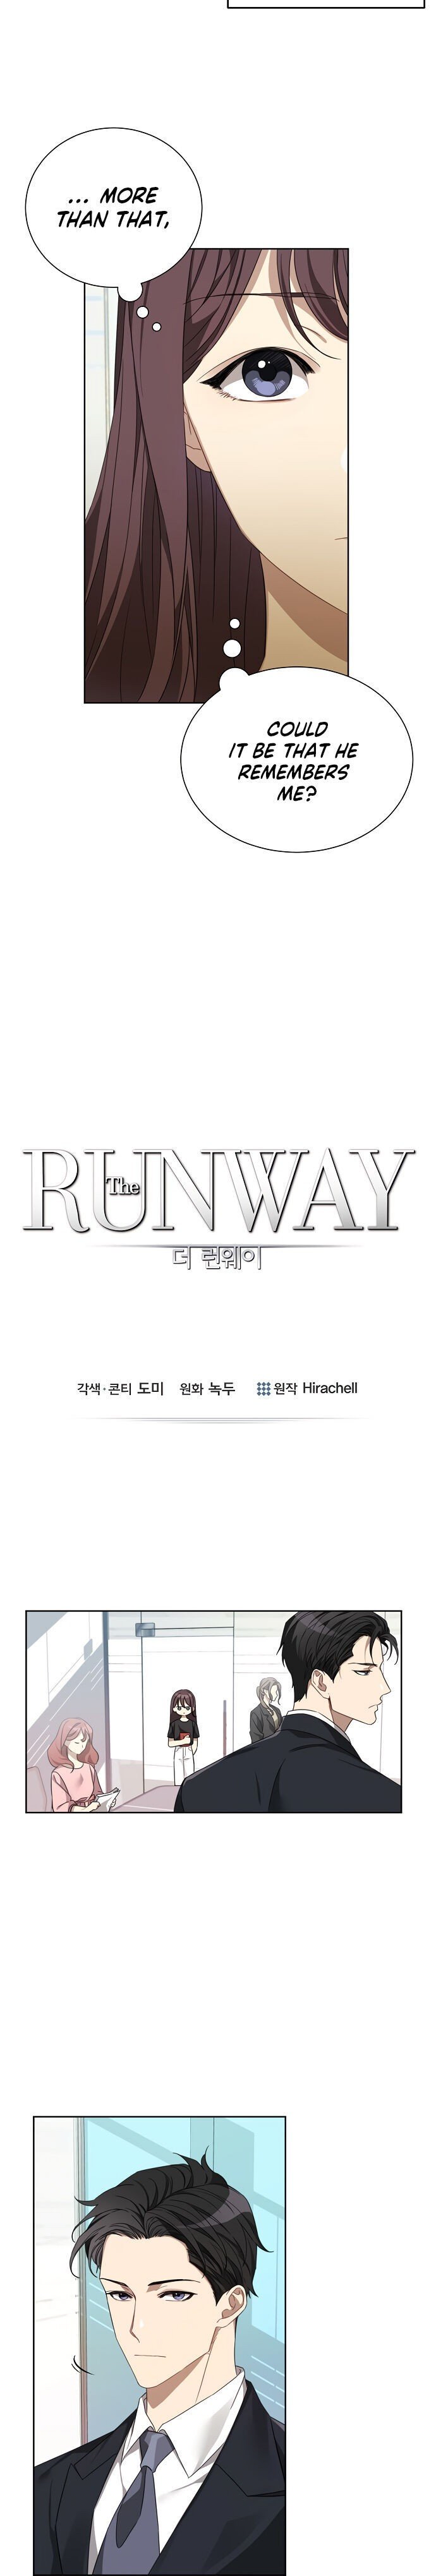 THE Runway chapter 2